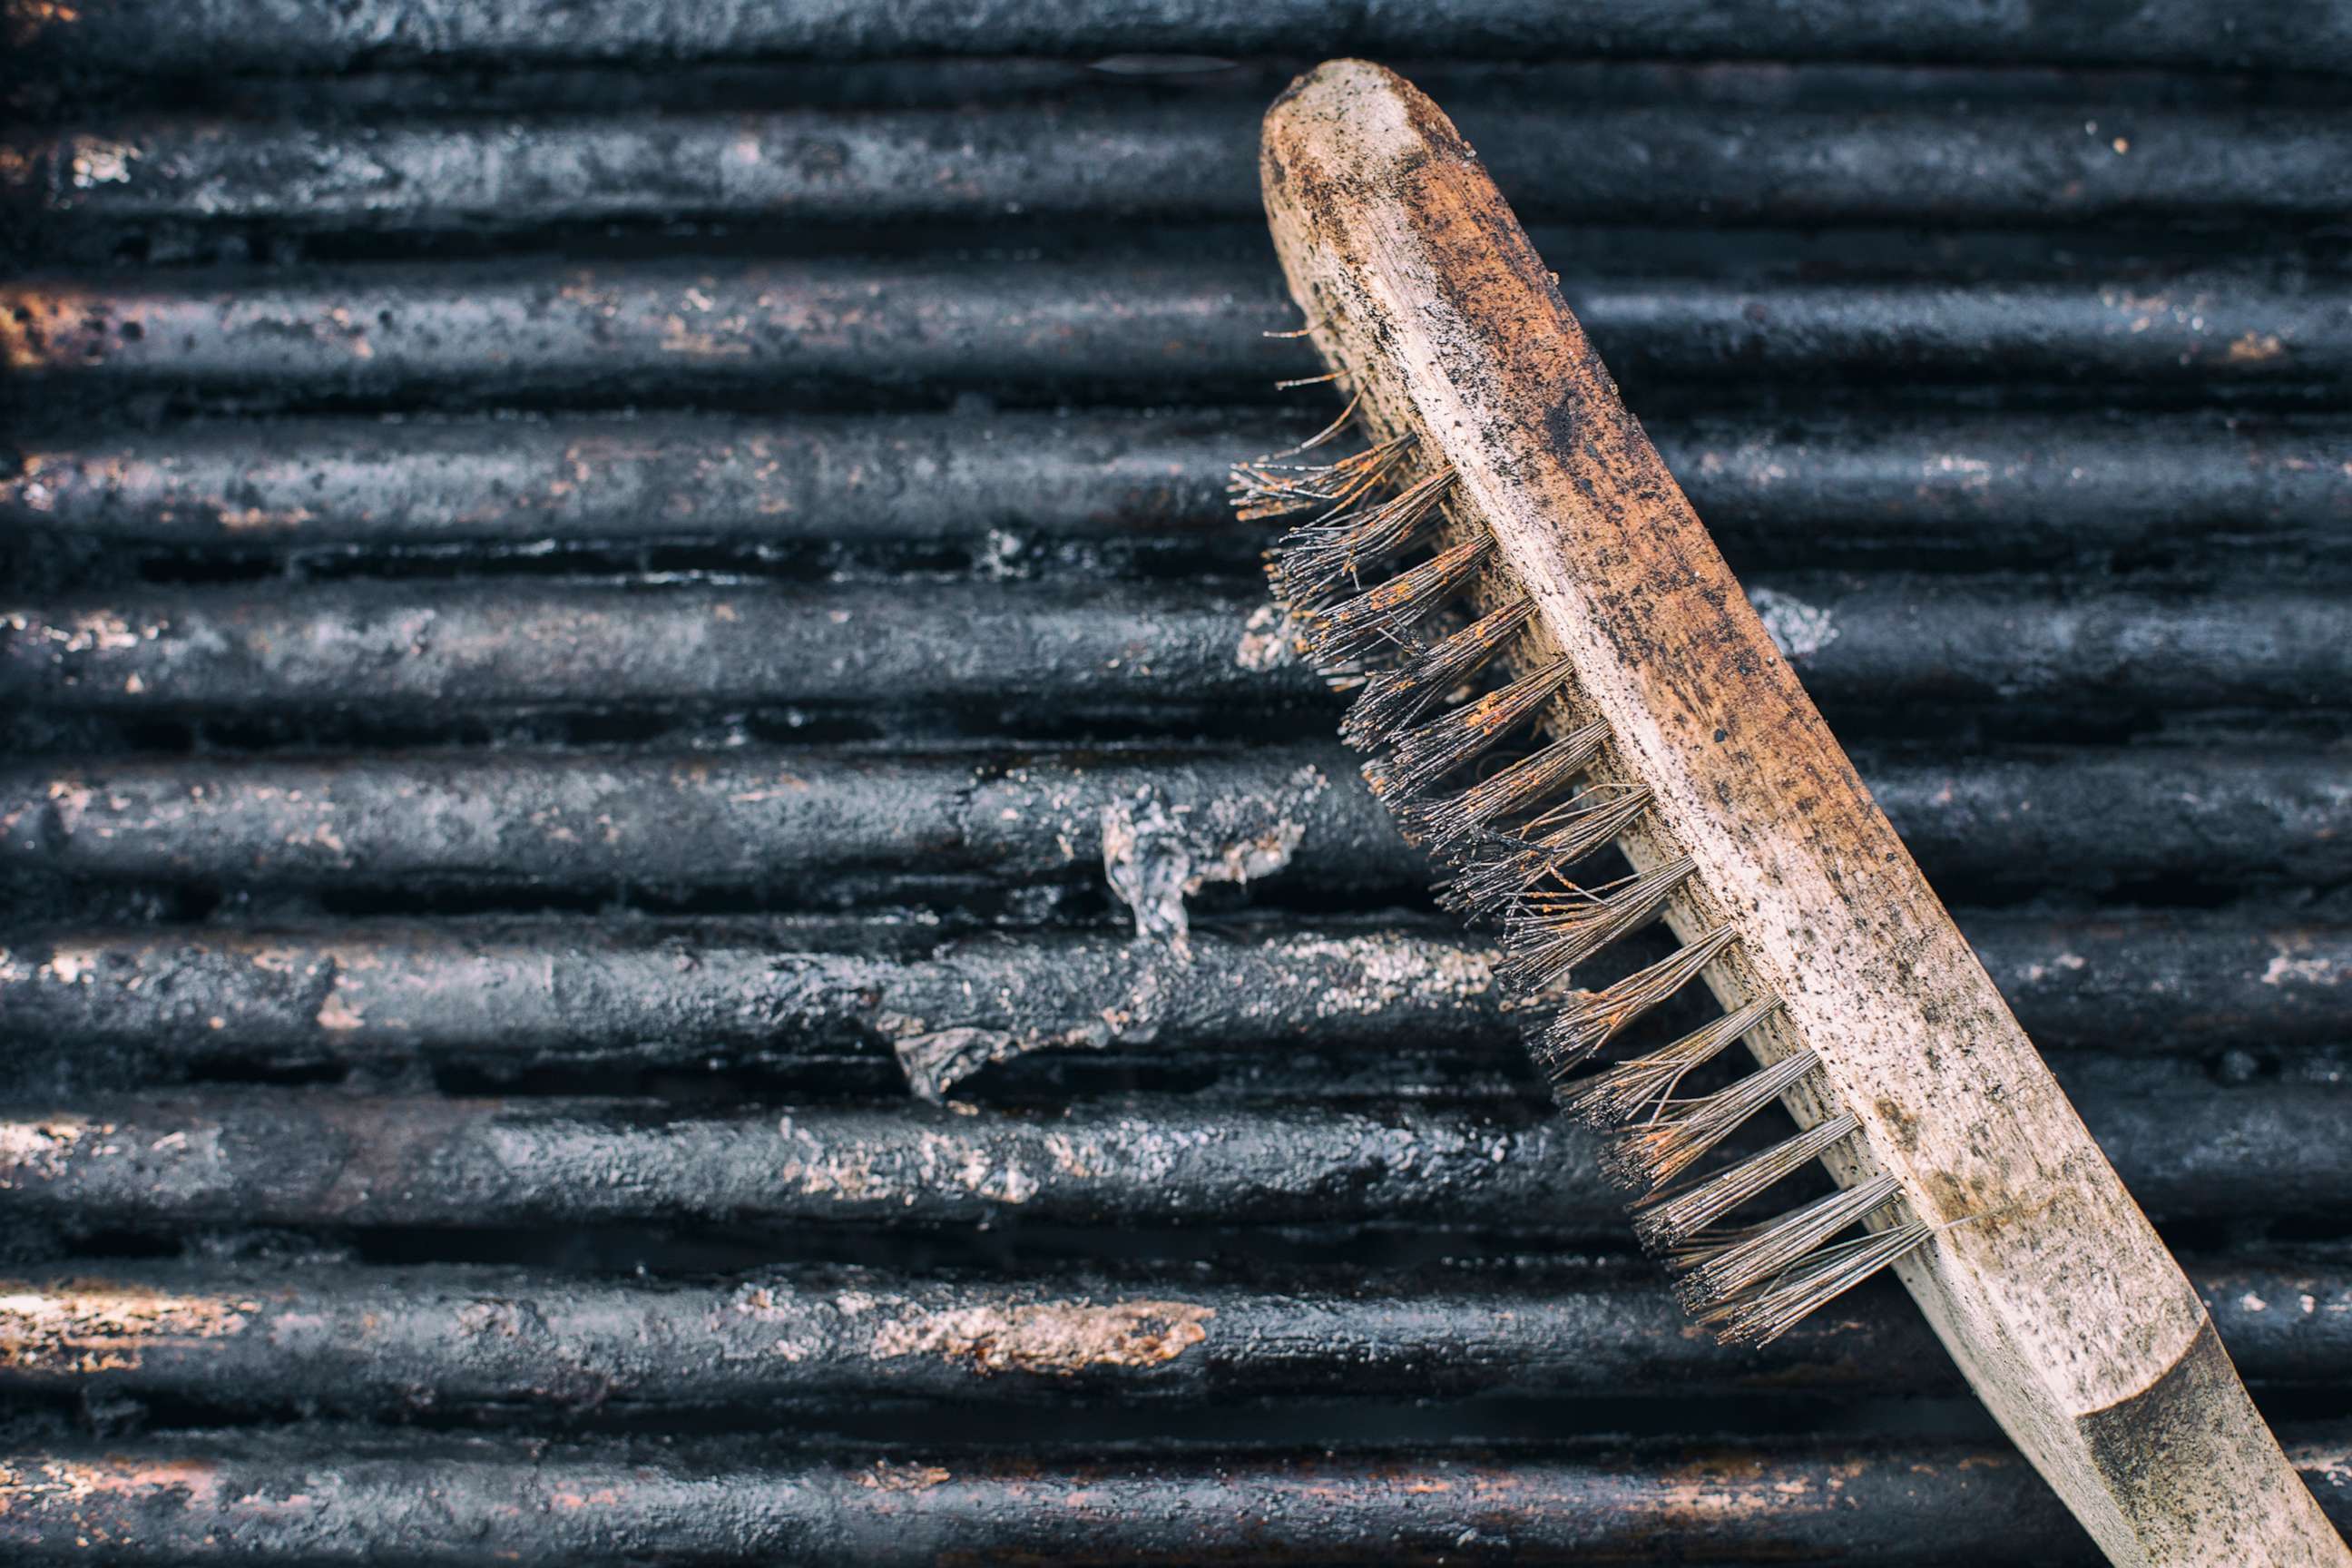 The Wrong Grill Brush Could Send You to the Emergency Room